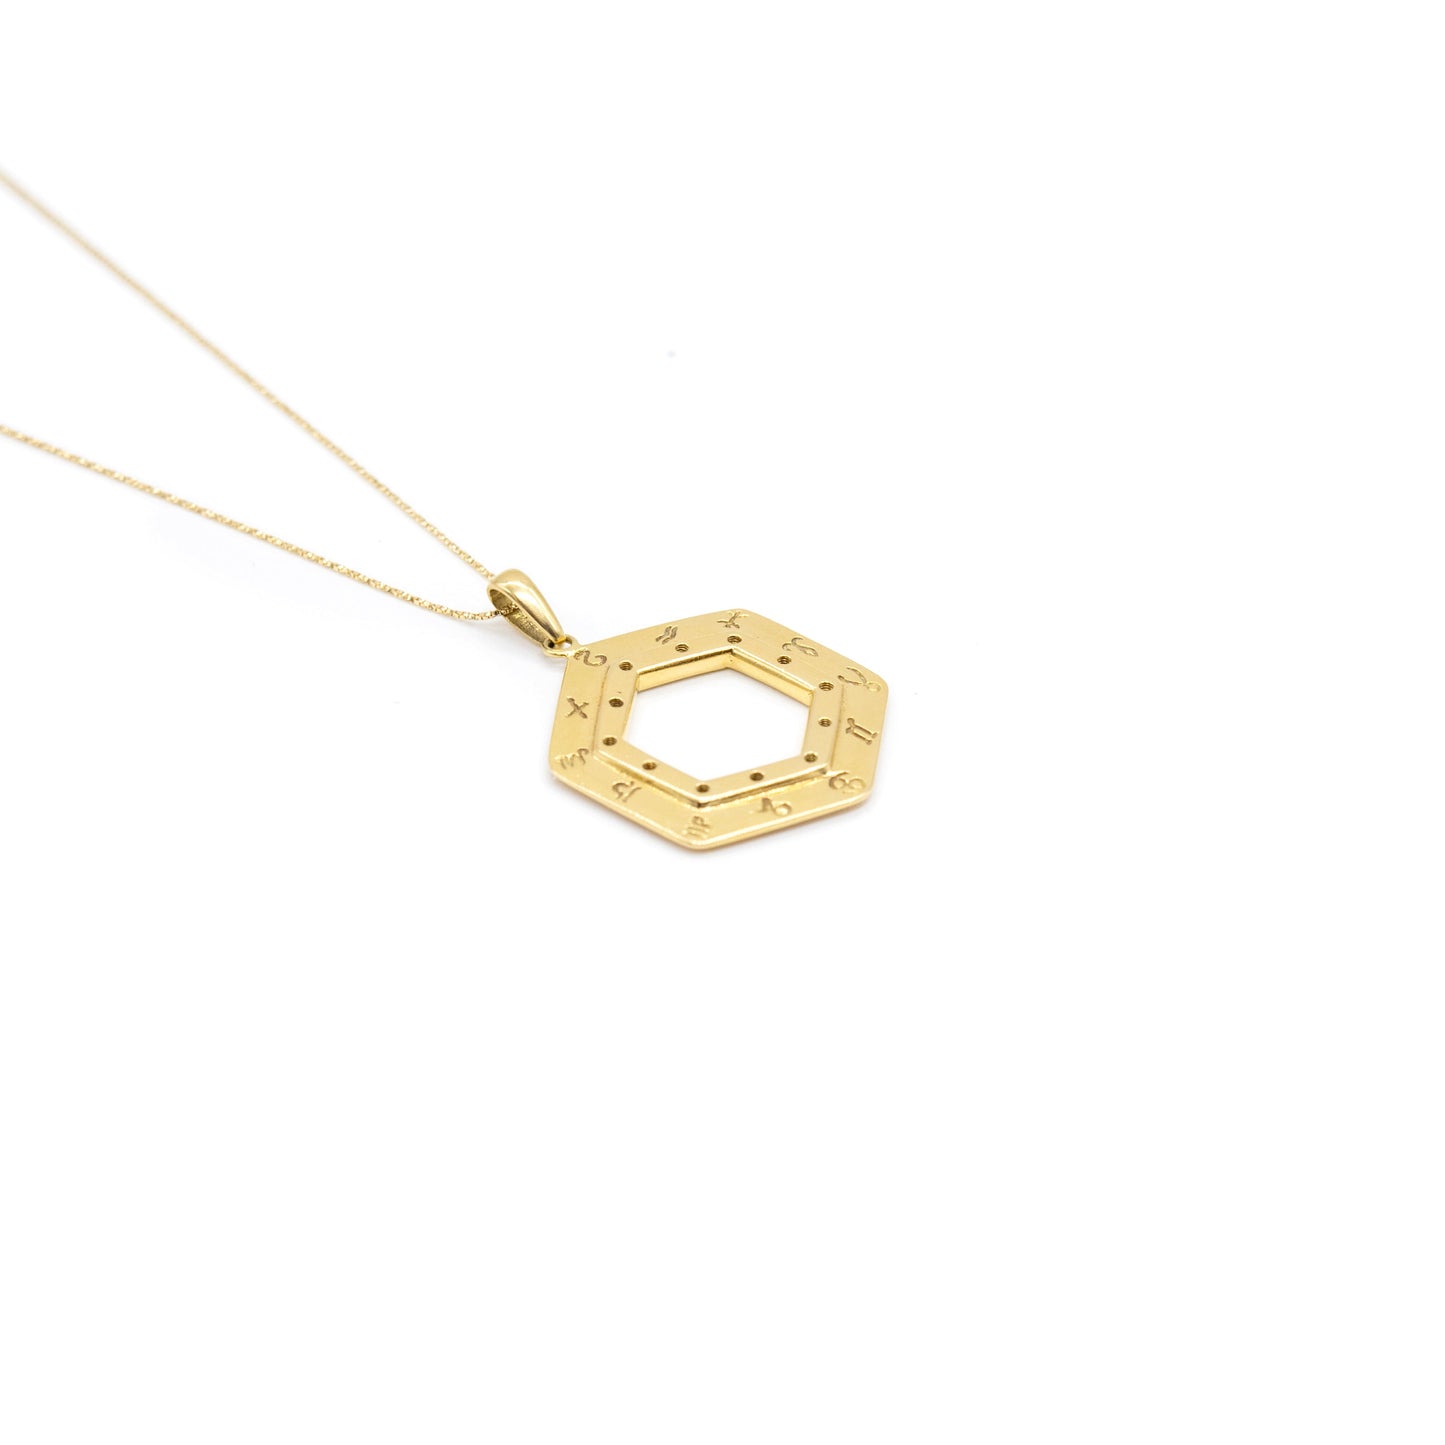 Vintage Yellow Gold Pendant For Women | Celeste | Vintage Jewelry | Pre-owned jewelry | Lil Milan